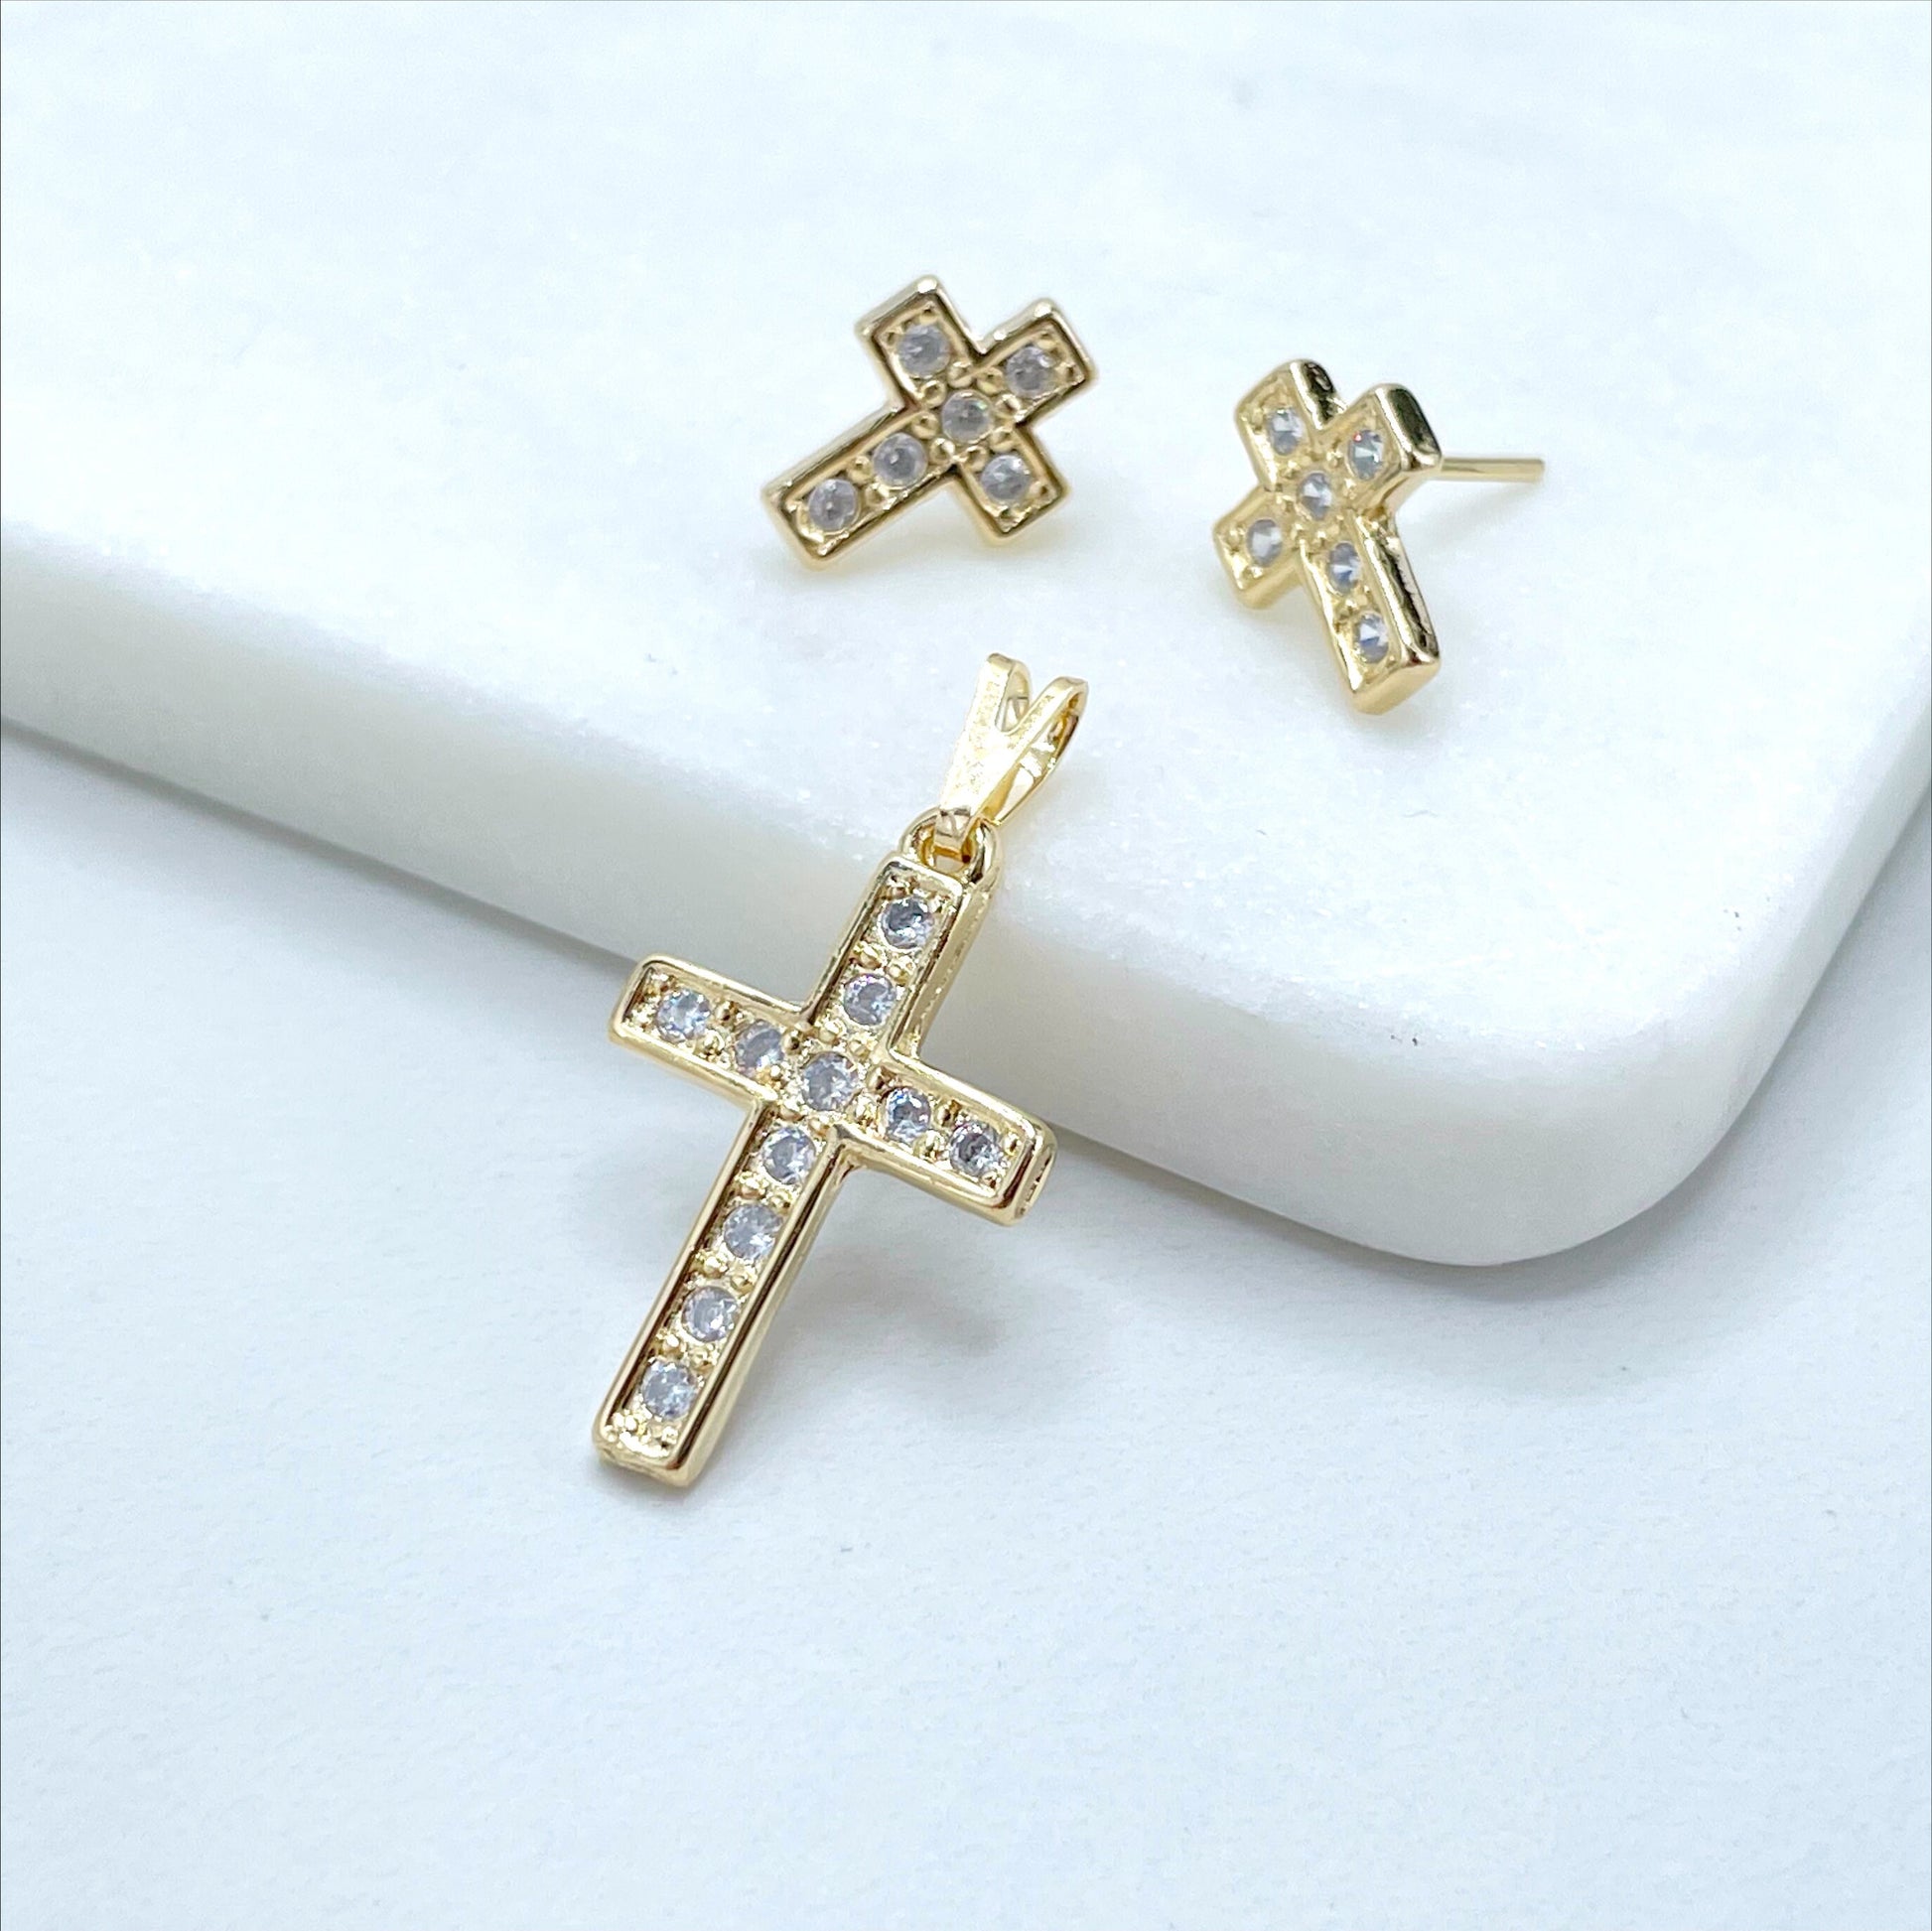 18k Gold Filled 2mm Curb Link Chain with Cubic Zirconia Cross Stud Earrings and Pendant, Wholesale Jewelry Making Supplies